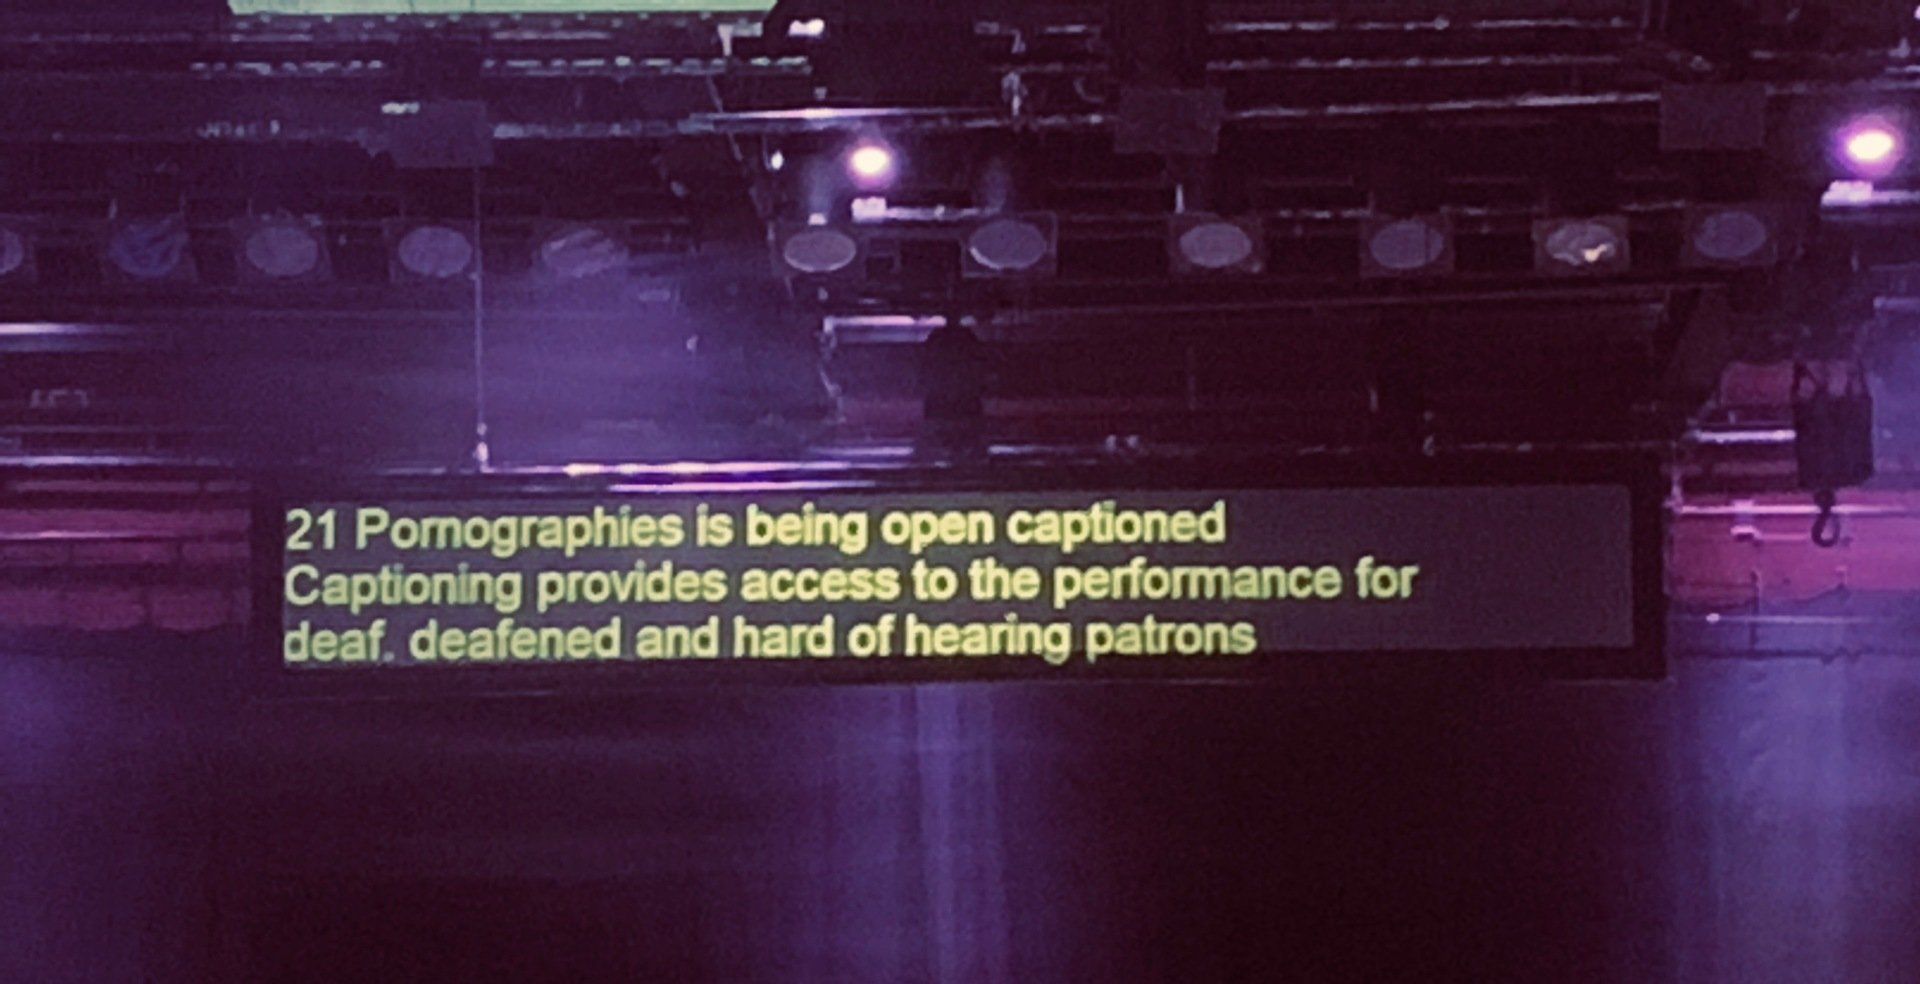 Hanging caption unit at theatre displaying text.